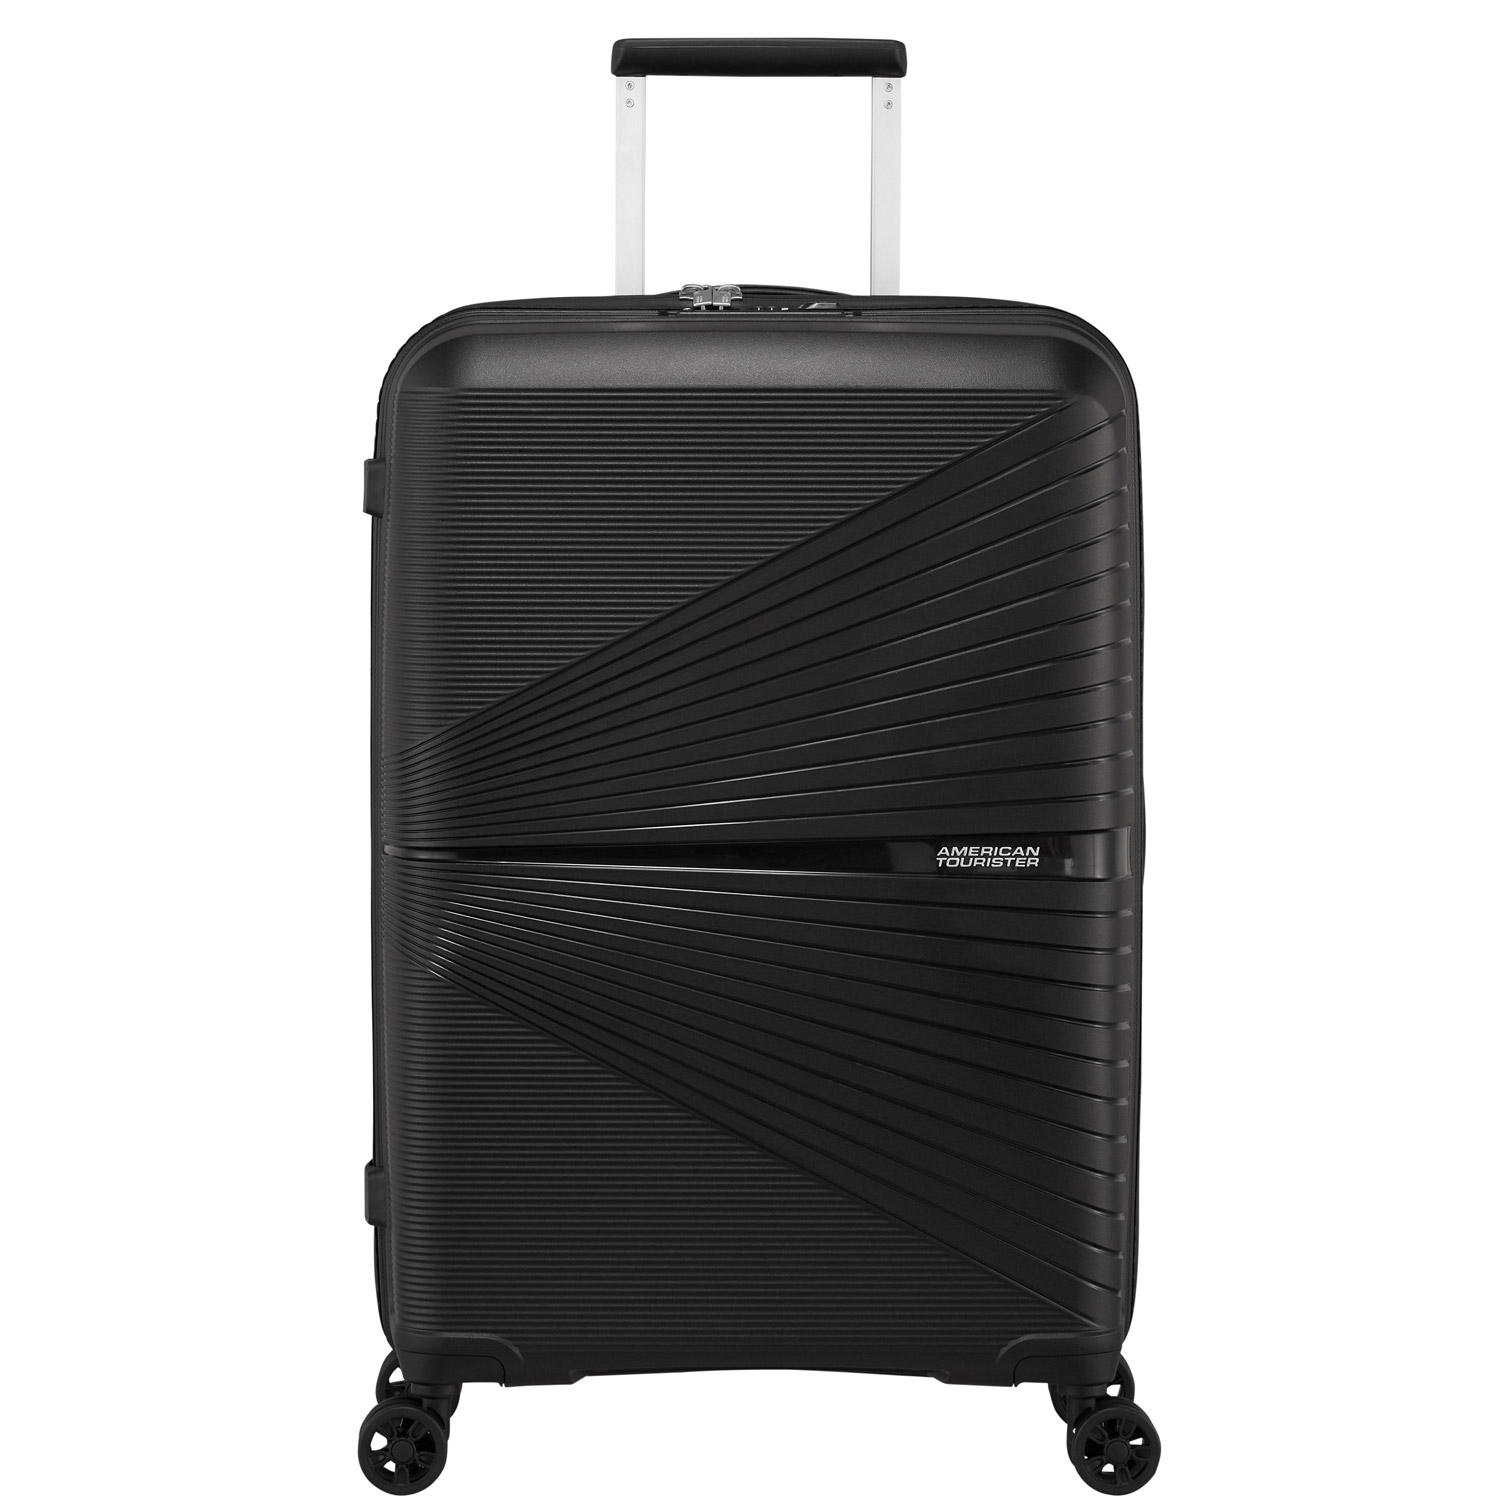 American Tourister Koffer mit 4 Rollen 67cm Airconic onyx black